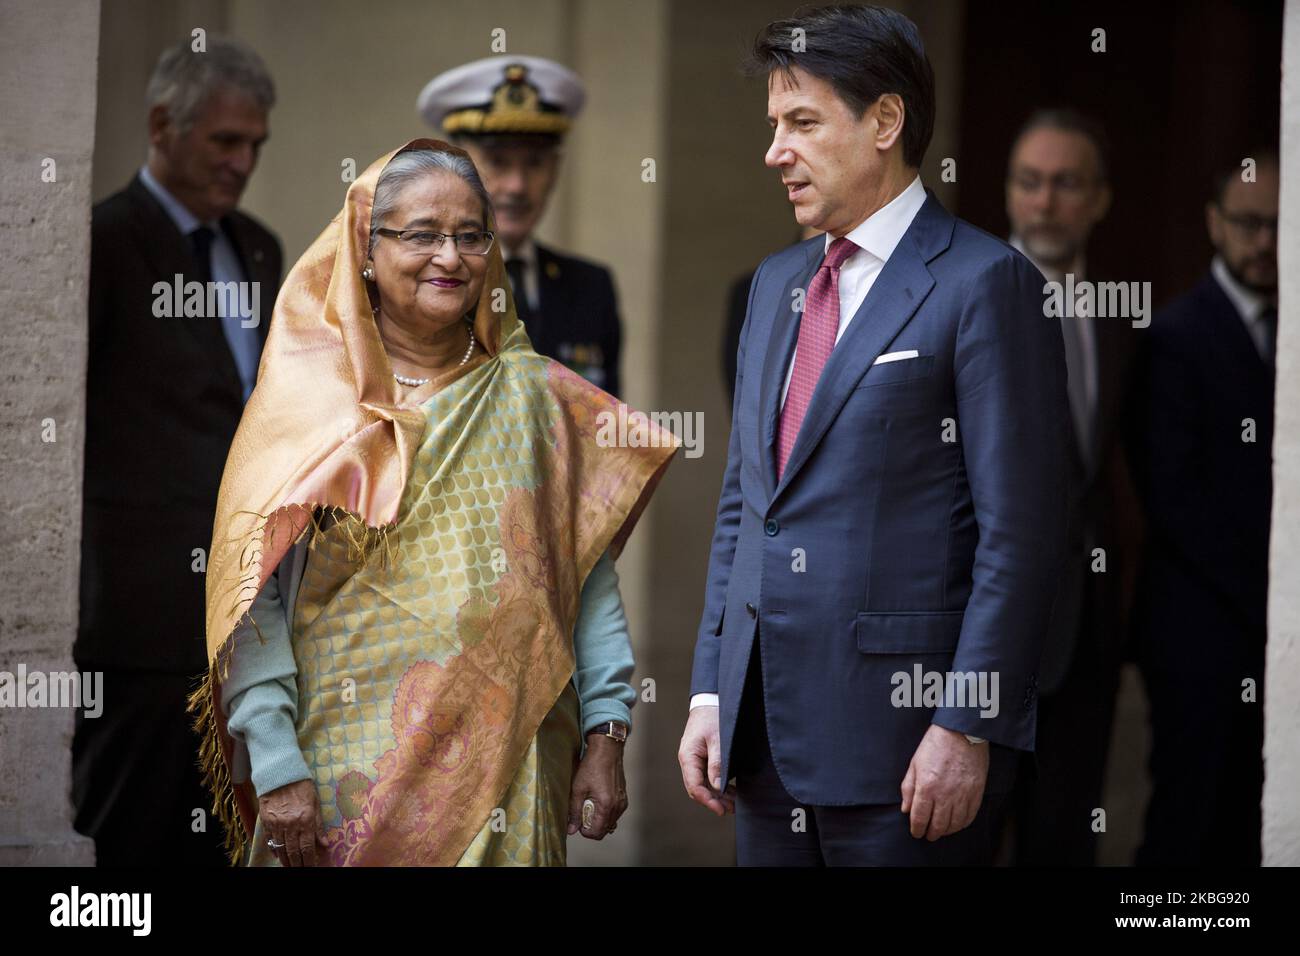 Italy's Prime Minister Giuseppe Conte and Sheikh Hasina Prime Minister of Bangladesh stand at Chigi Palace in Rome, Italy on February 5, 2020. (Photo by Christian Minelli/NurPhoto) Stock Photo